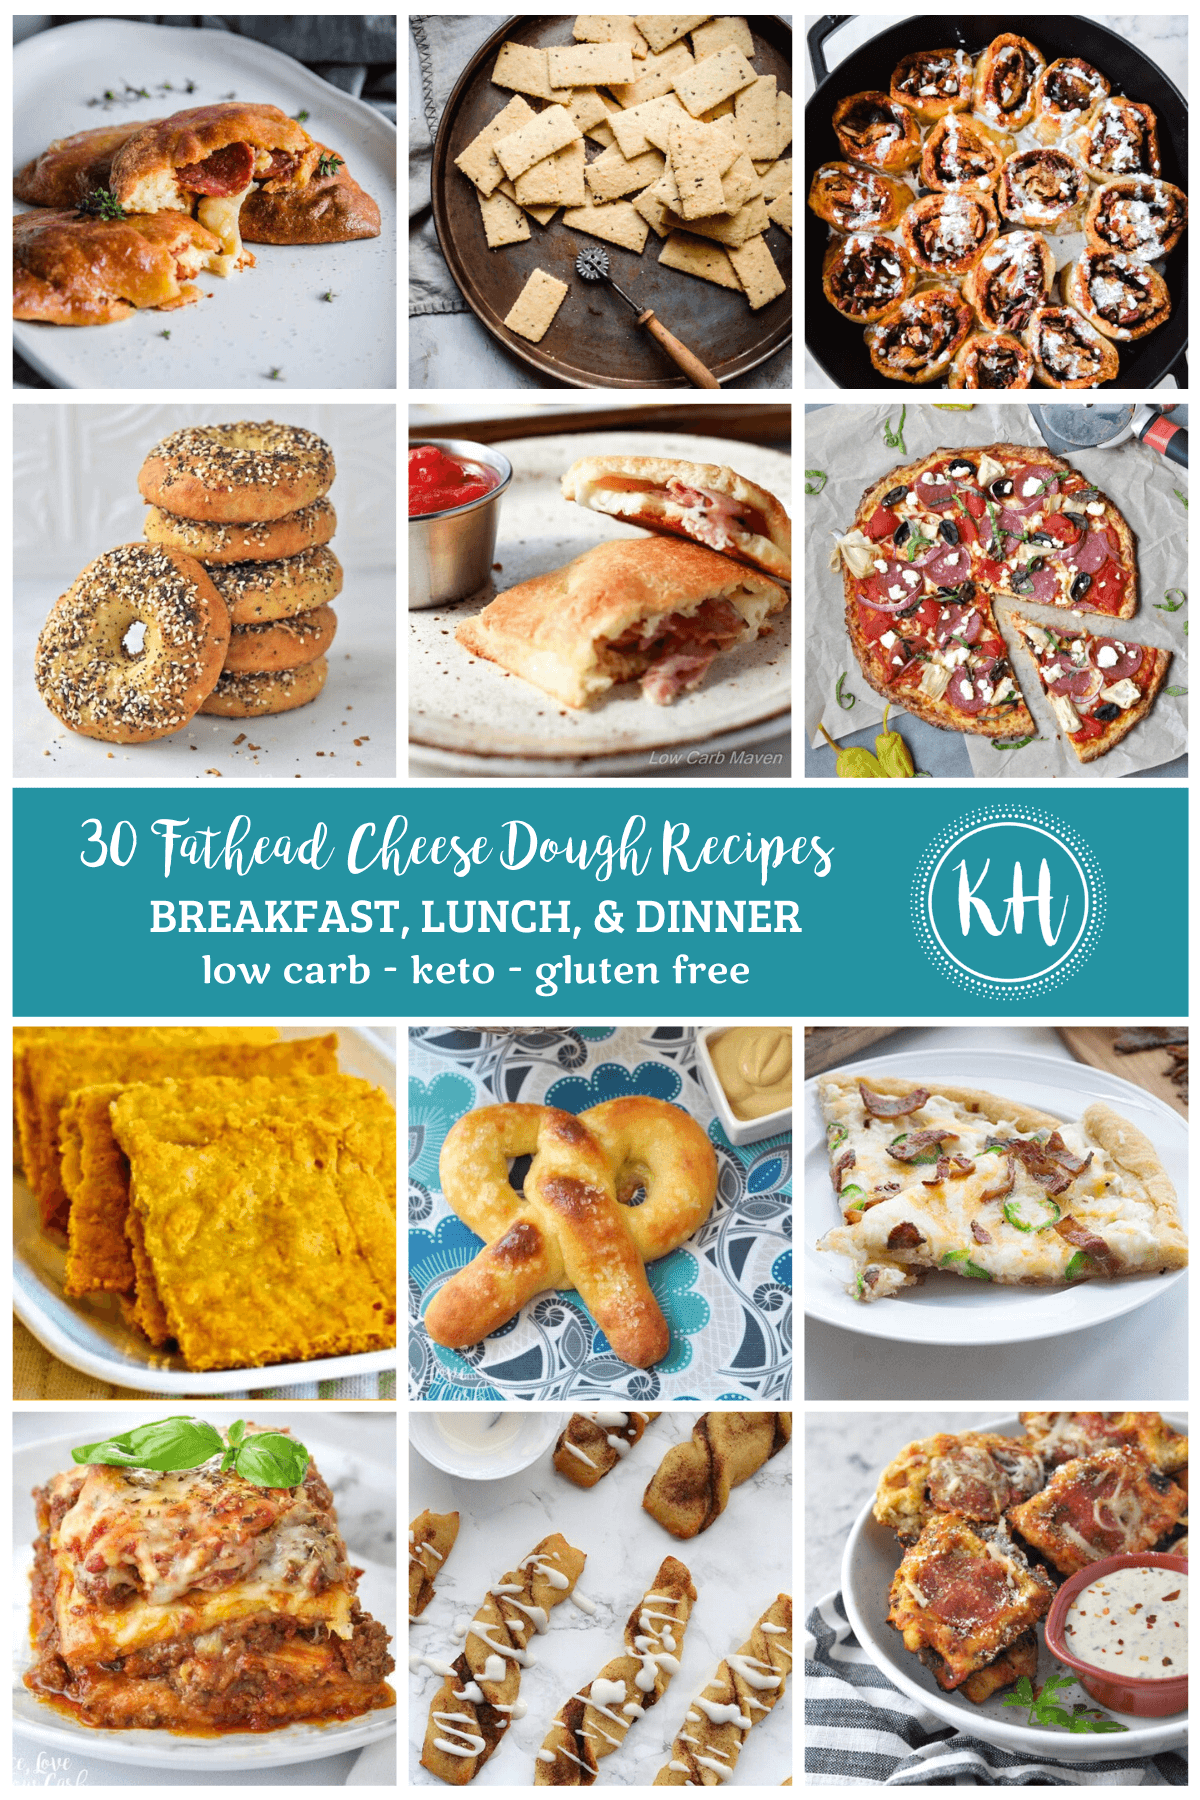 https://hungryfoodie.com/wp-content/uploads/2020/05/Fathead-Cheese-Dough-Recipes600x900kh.png